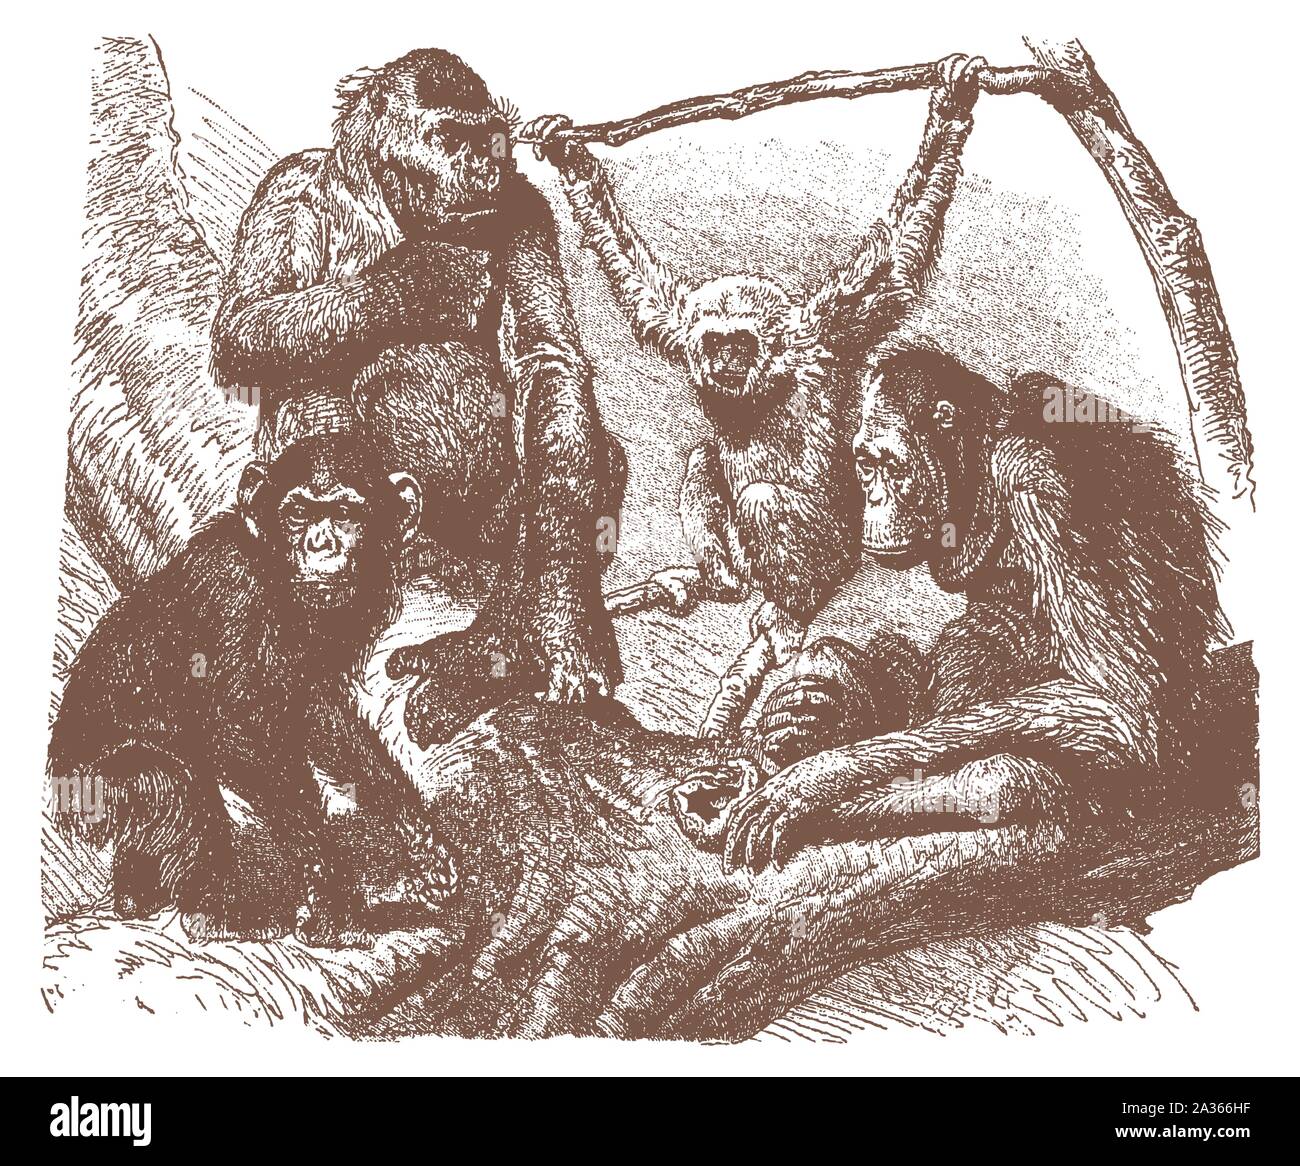 Gorilla, chimpanzee, silver gibbon and orang-utan sitting on a tree. Illustration after a lithography engraving from the early 20th century Stock Vector